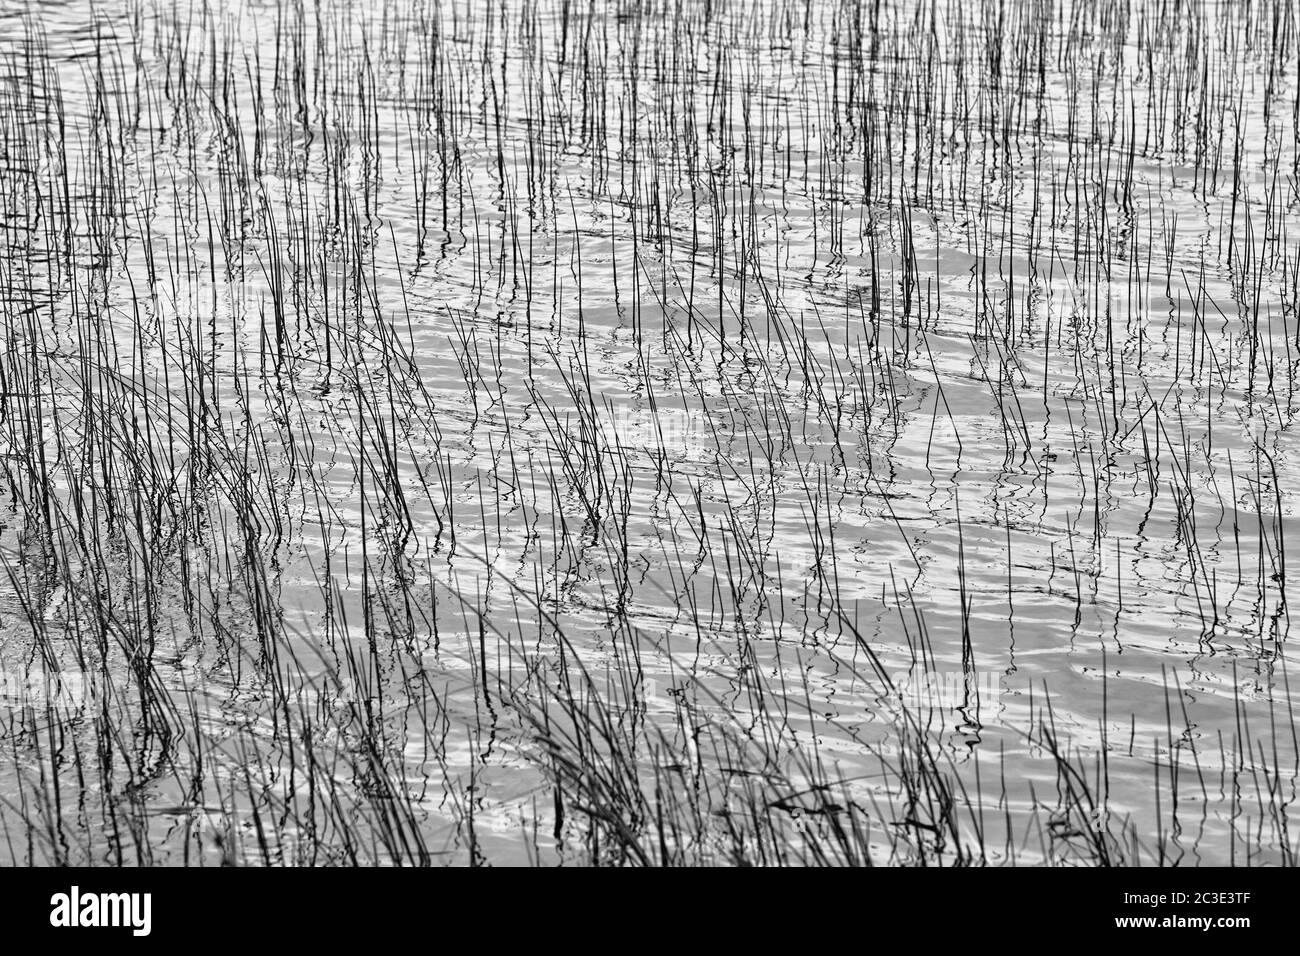 On the lake, rushes plant detail. Artistic look in black and white. Stock Photo